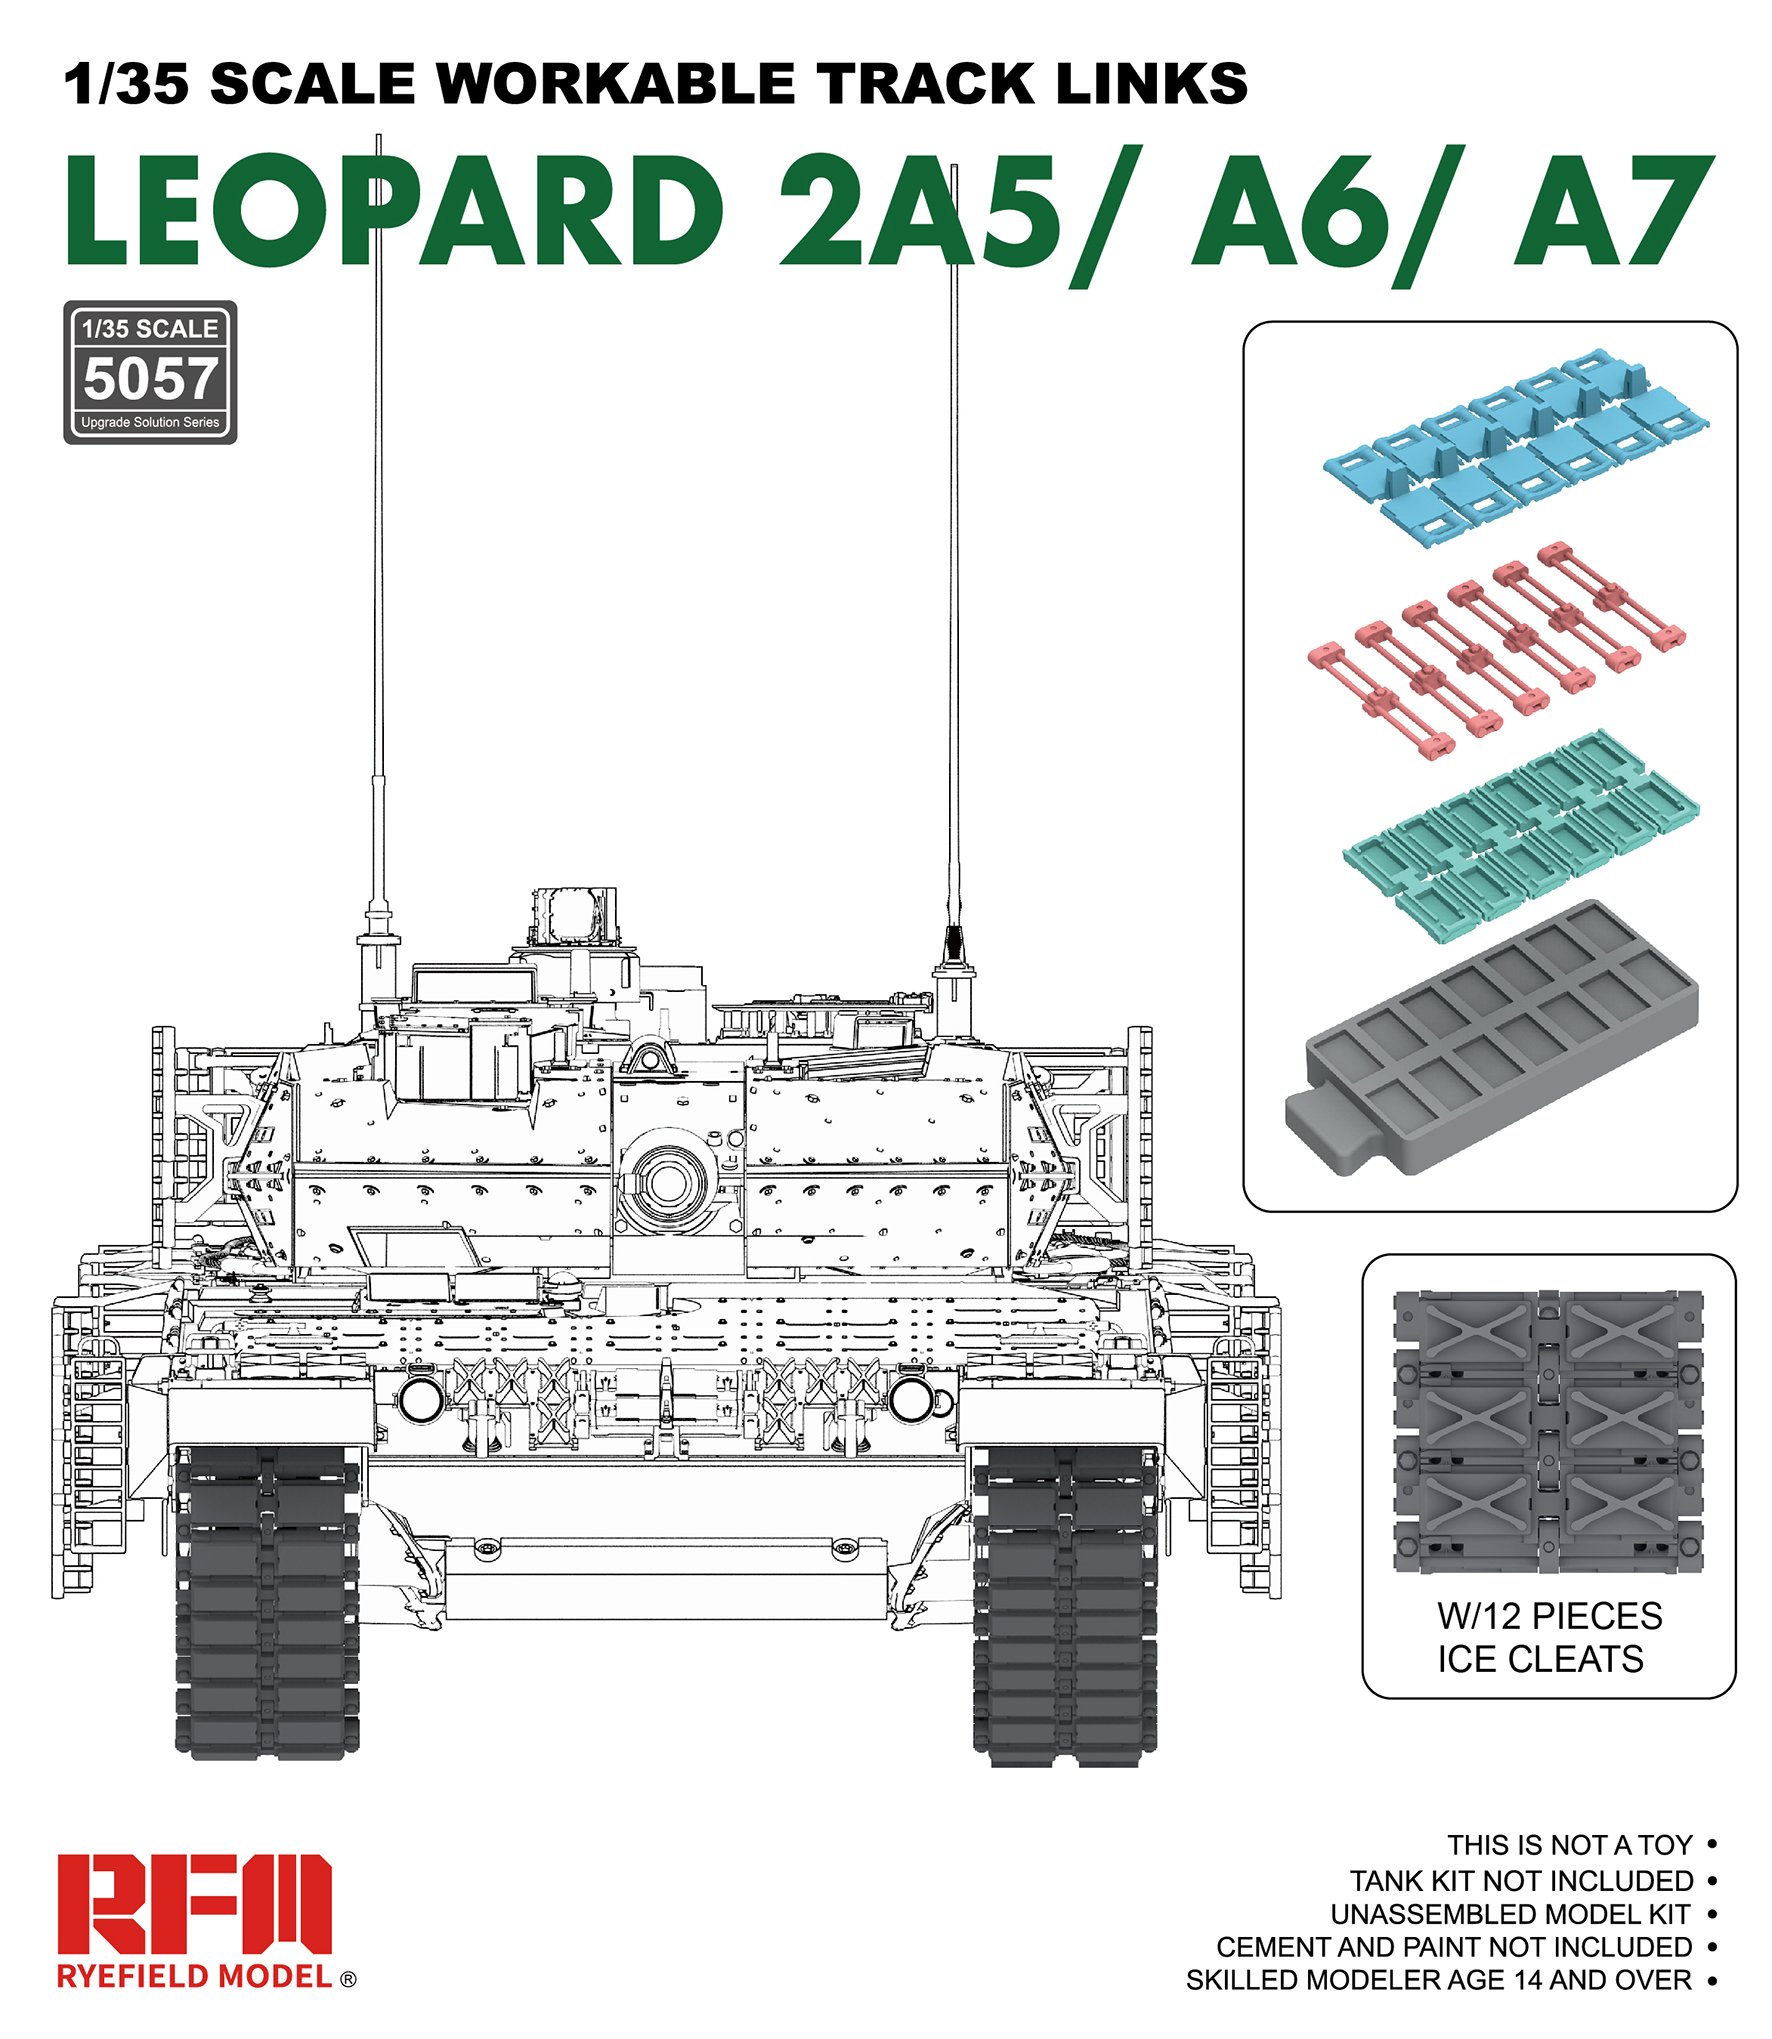 Leopard 2 A5/A6/A7  workable track links